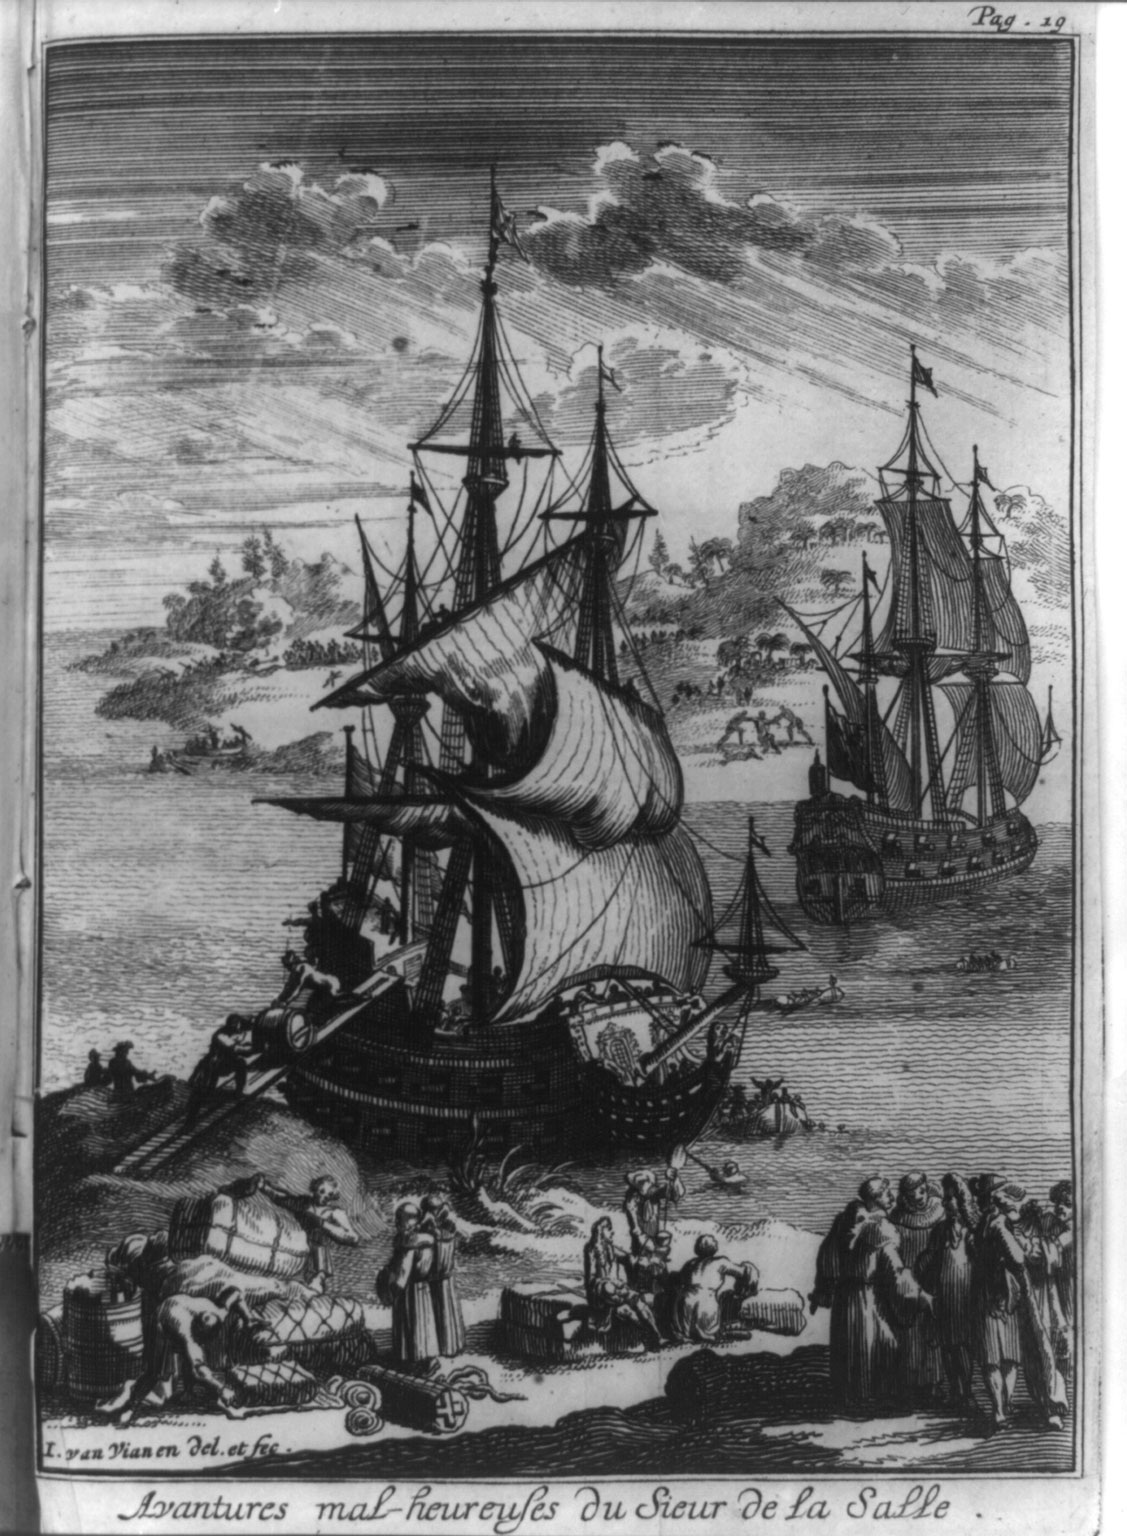 LaSalle and others debark ship, 1698